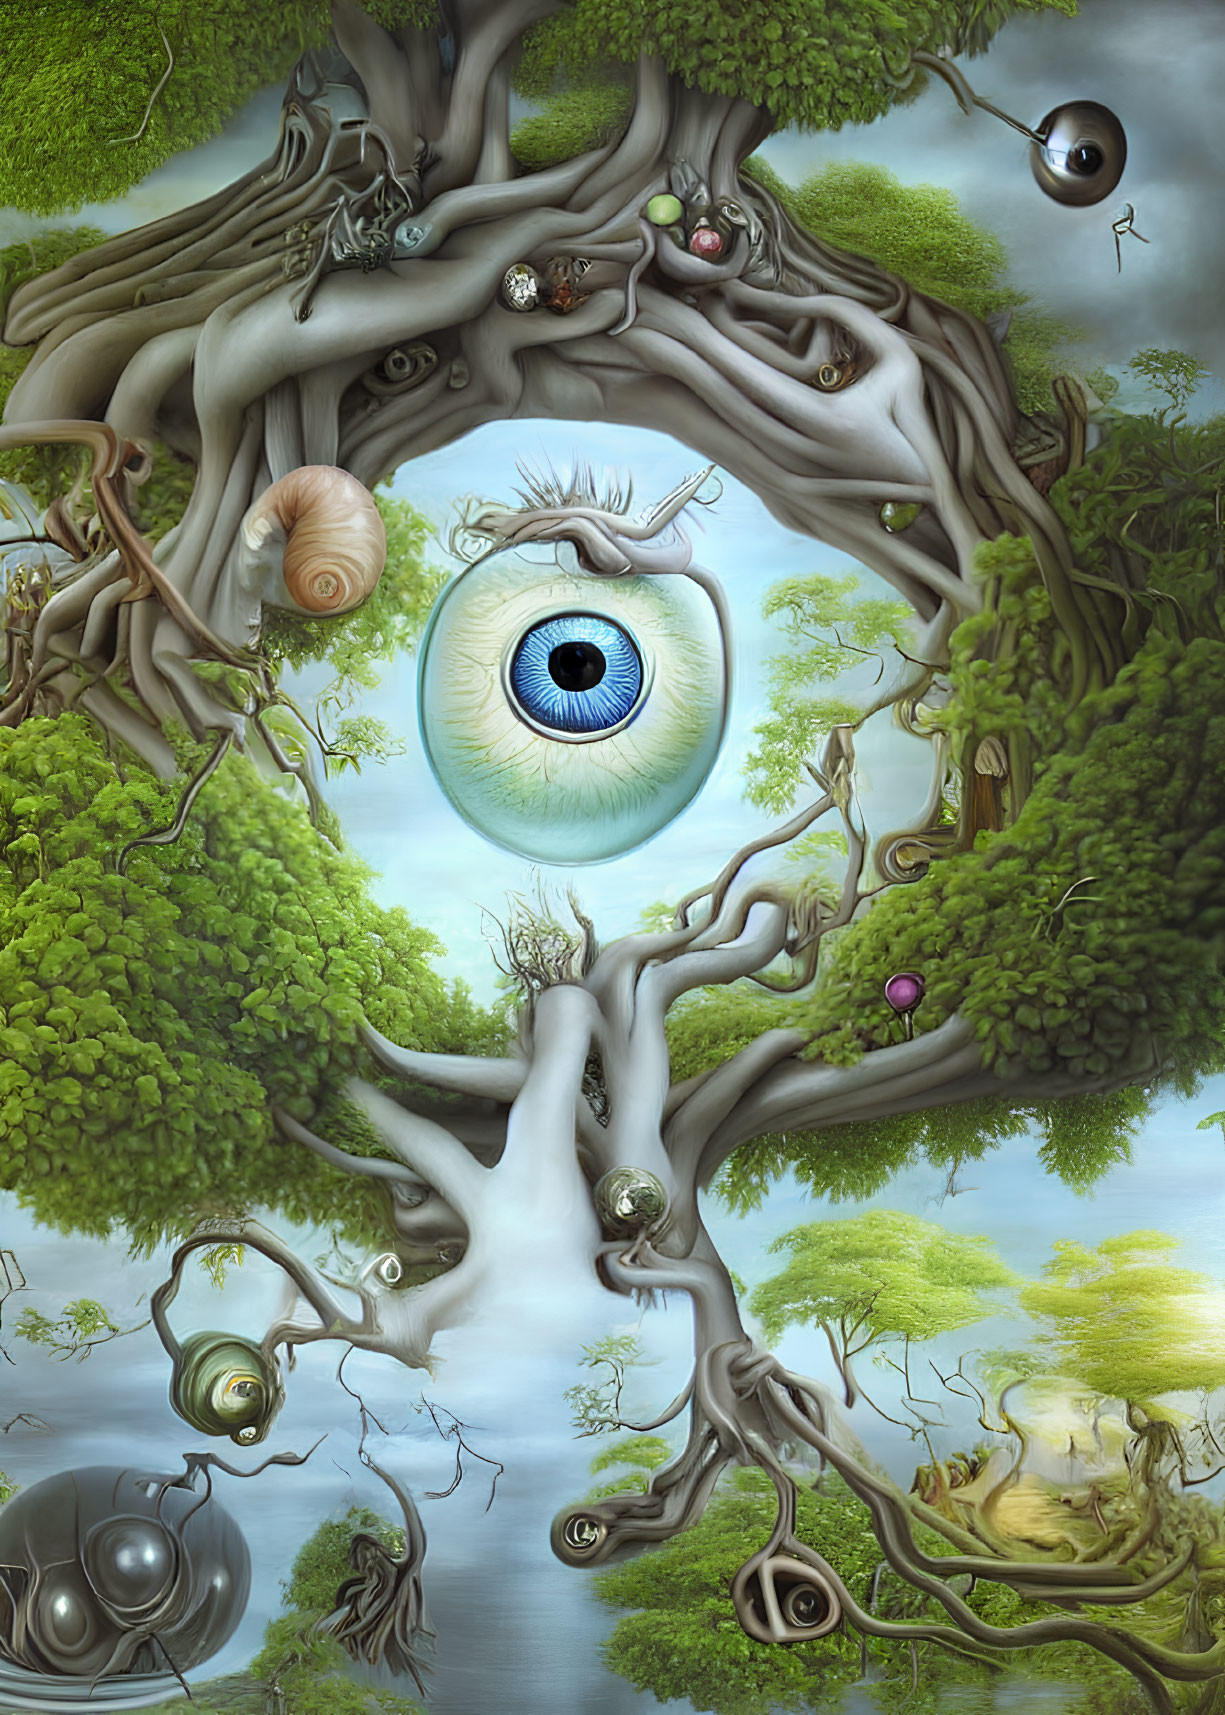 Surreal painting featuring tree with eye, snails, and floating orbs